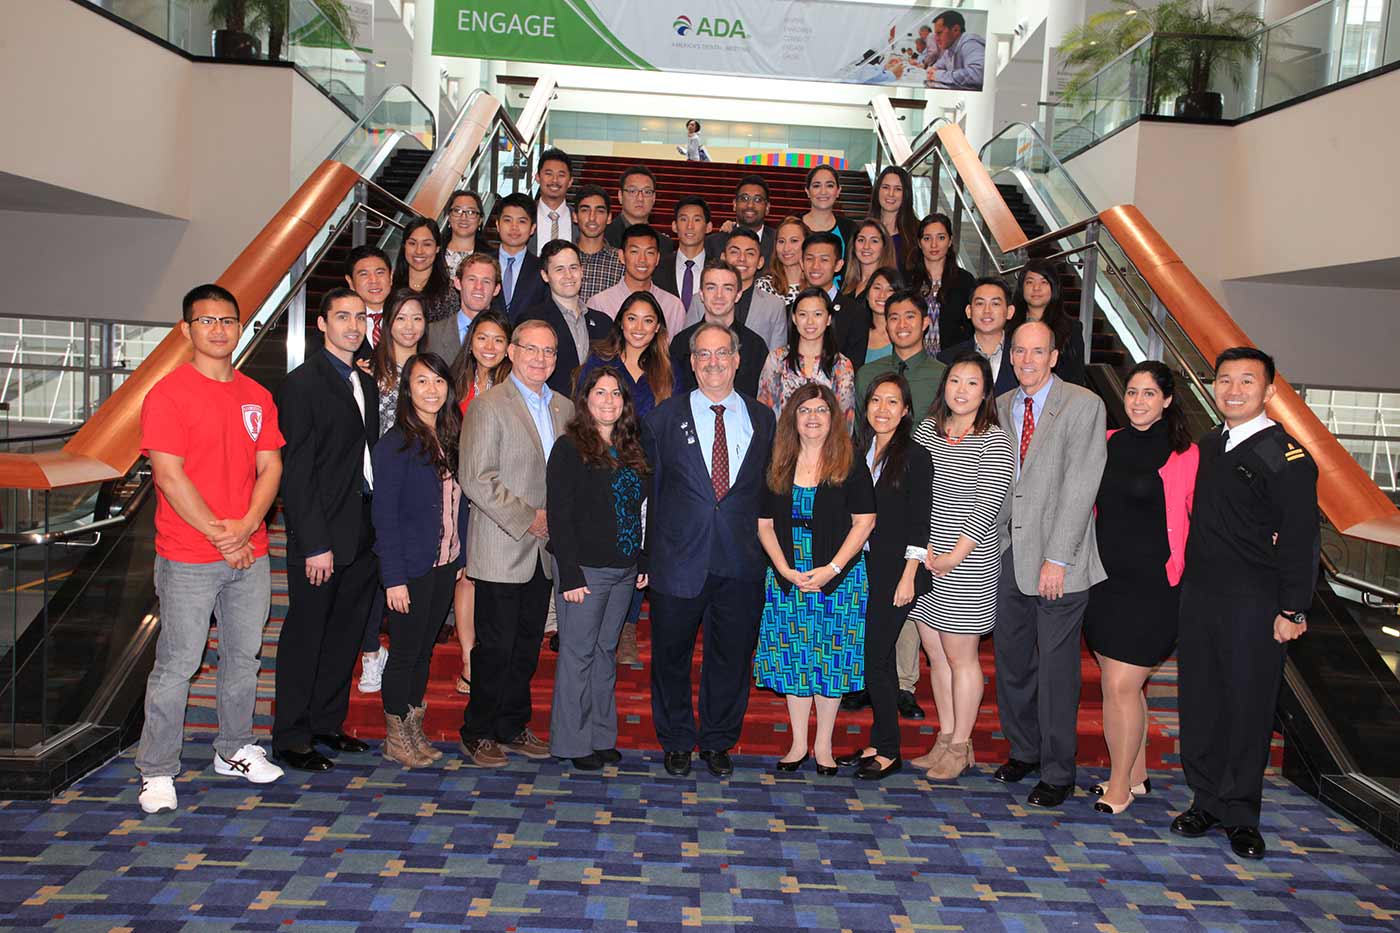 Photo of students with Donna and Irv at the Annual Meeting of the American Dental Association.